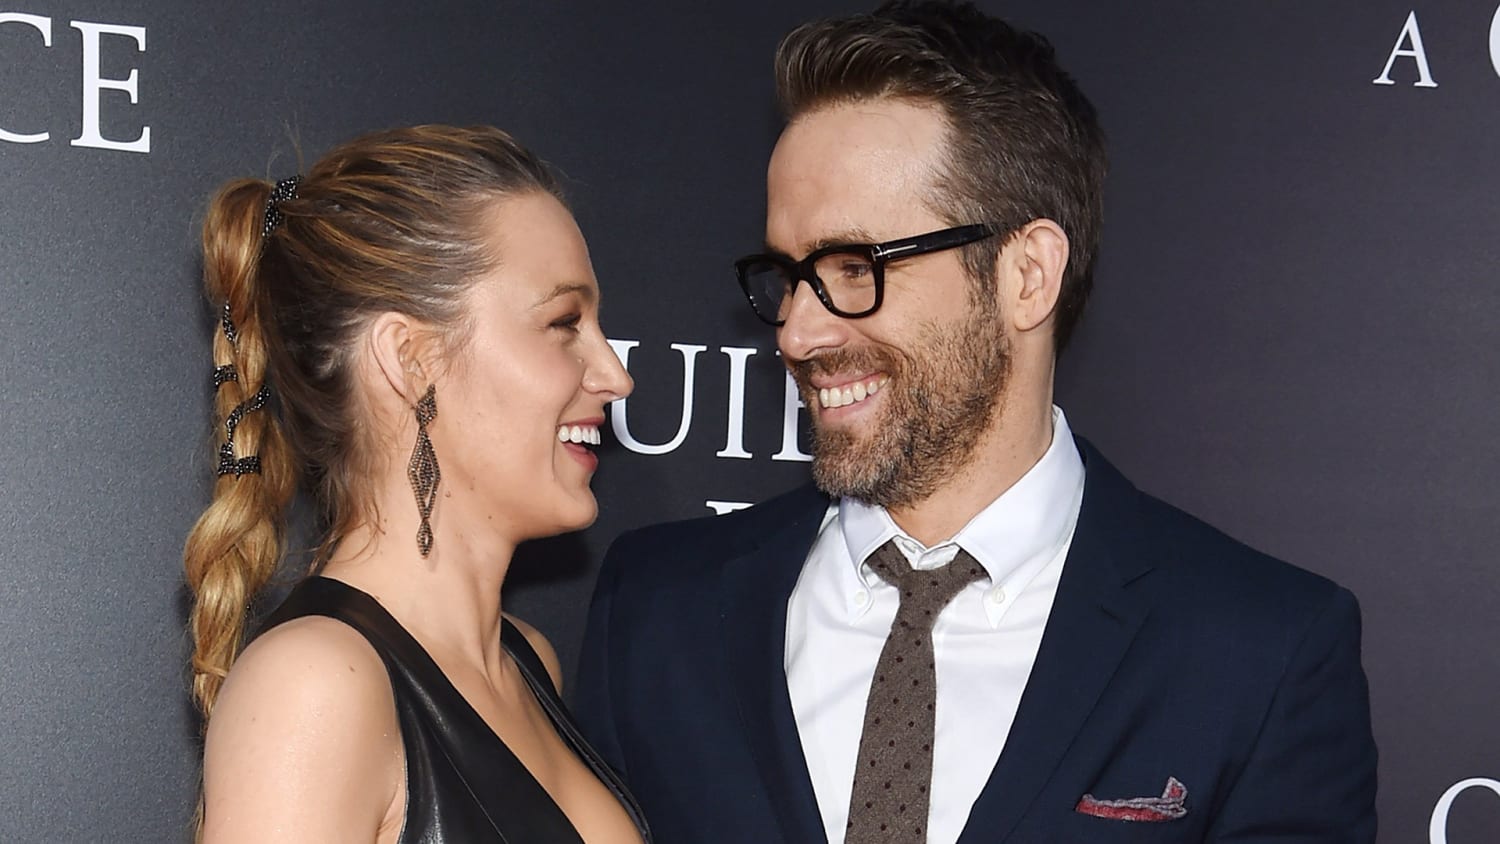 Blake Lively gets revenge on Ryan Reynolds with hilarious Instagram post - TODAY.com1920 x 1080